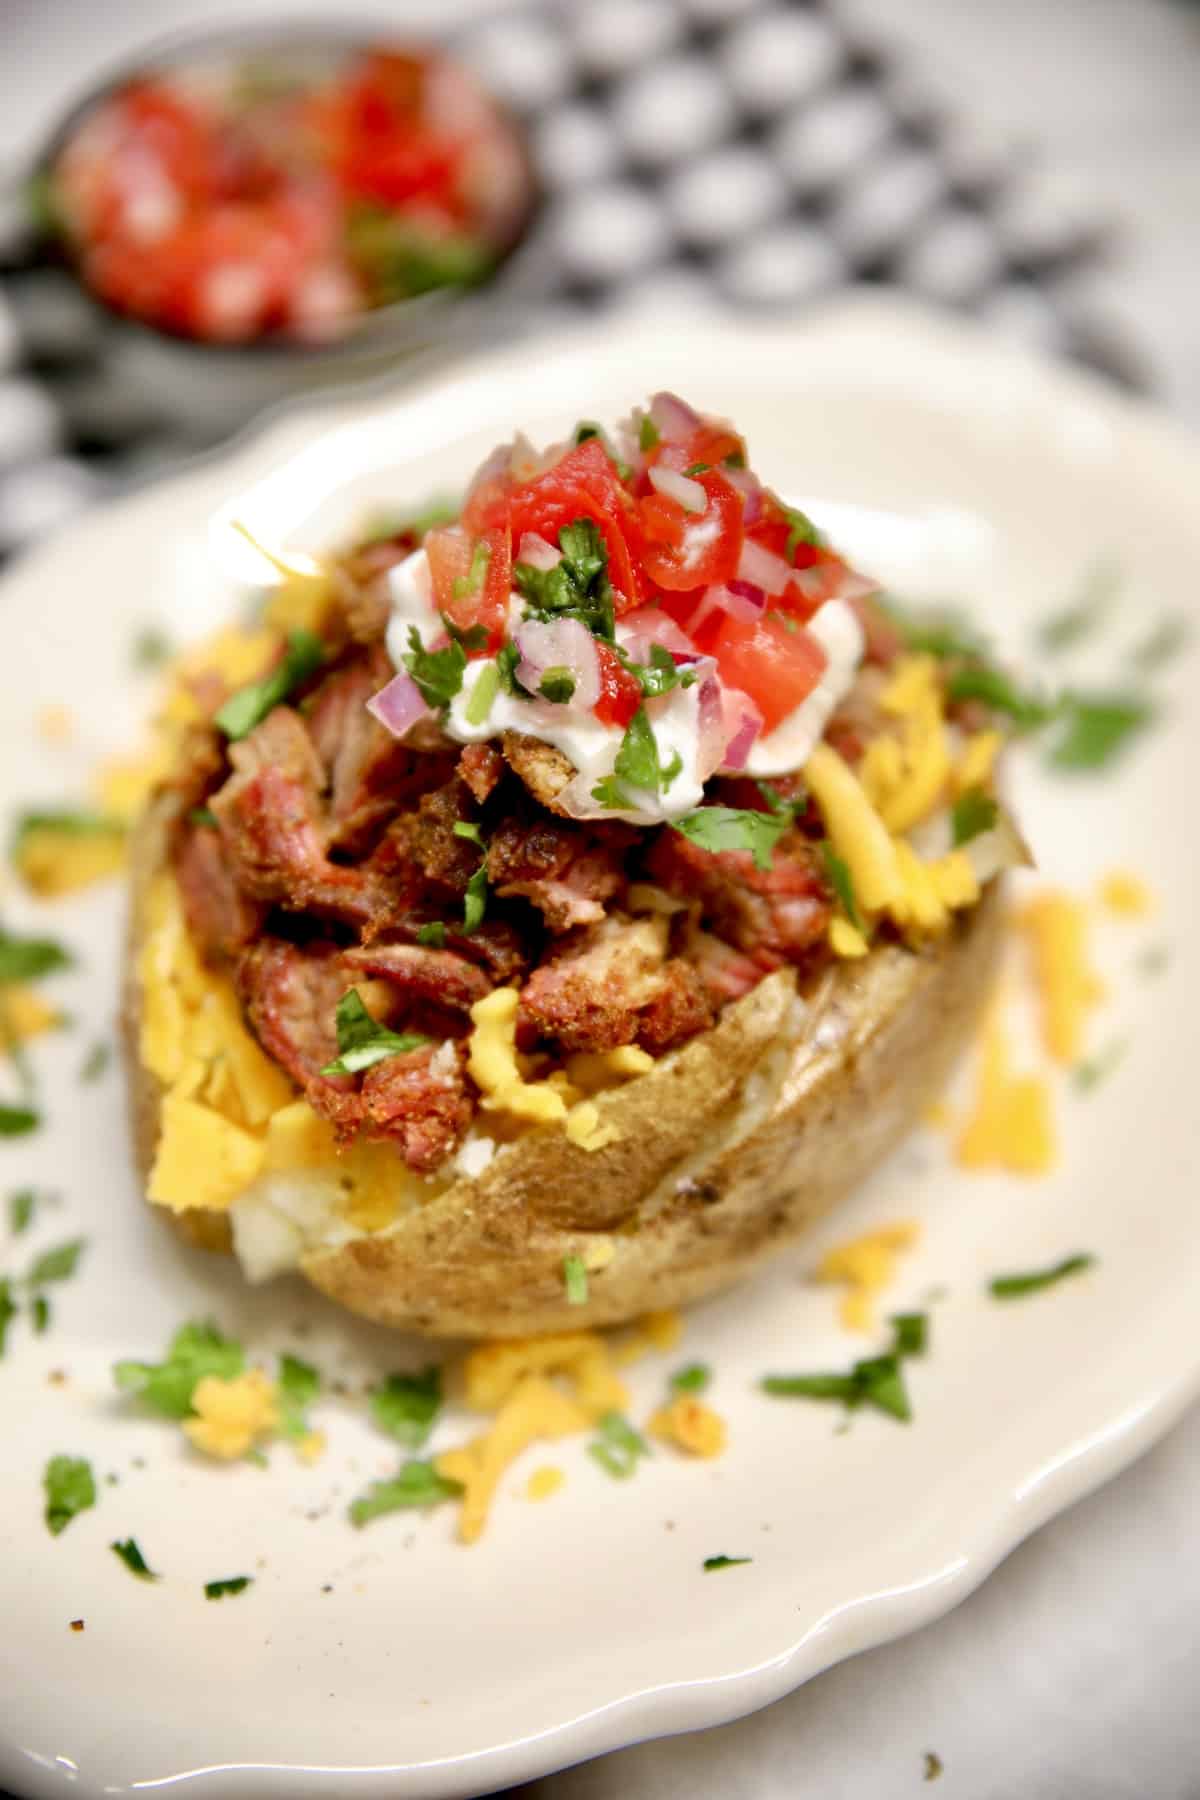 Loaded baked potato with short ribs, cheese and salsa.